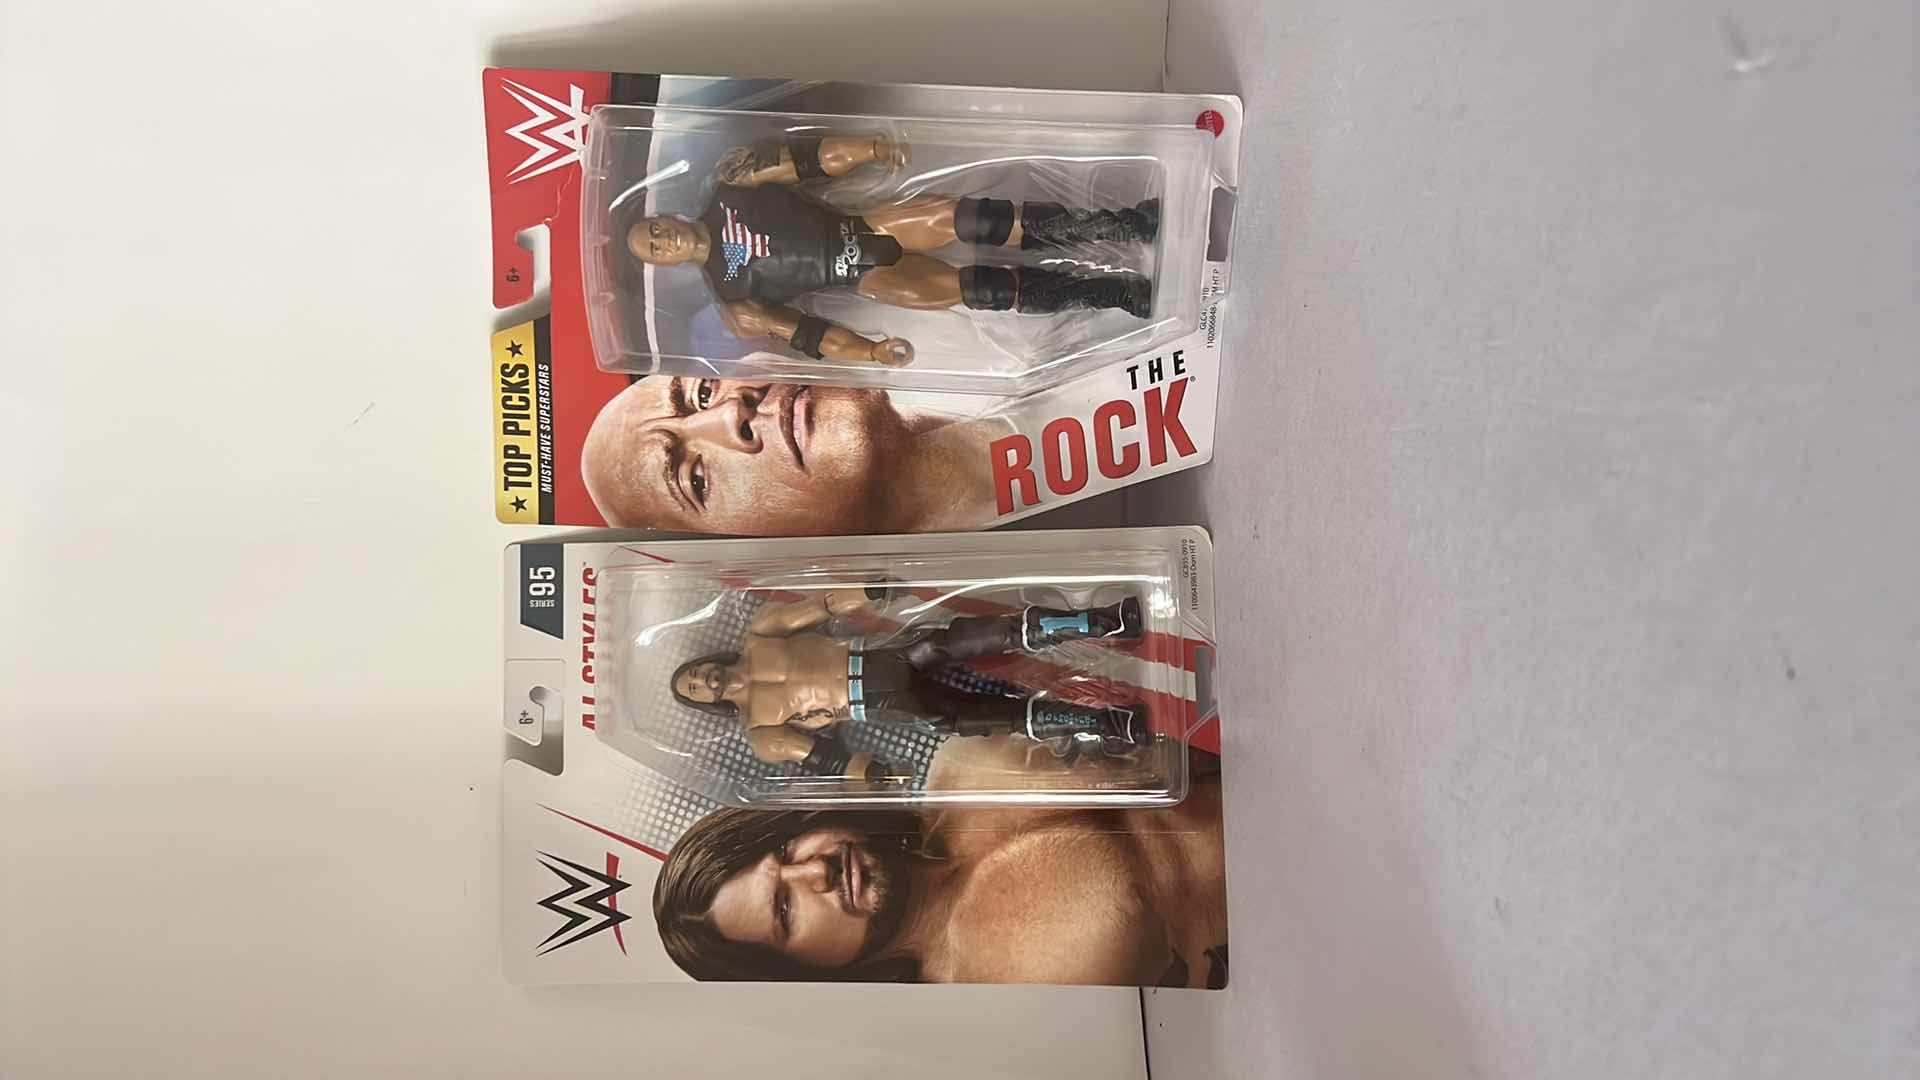 Photo 1 of 2-BRAND NEW MATTEL WWE ACTION FIGURES “THE ROCK & AJ STYLES”  $30